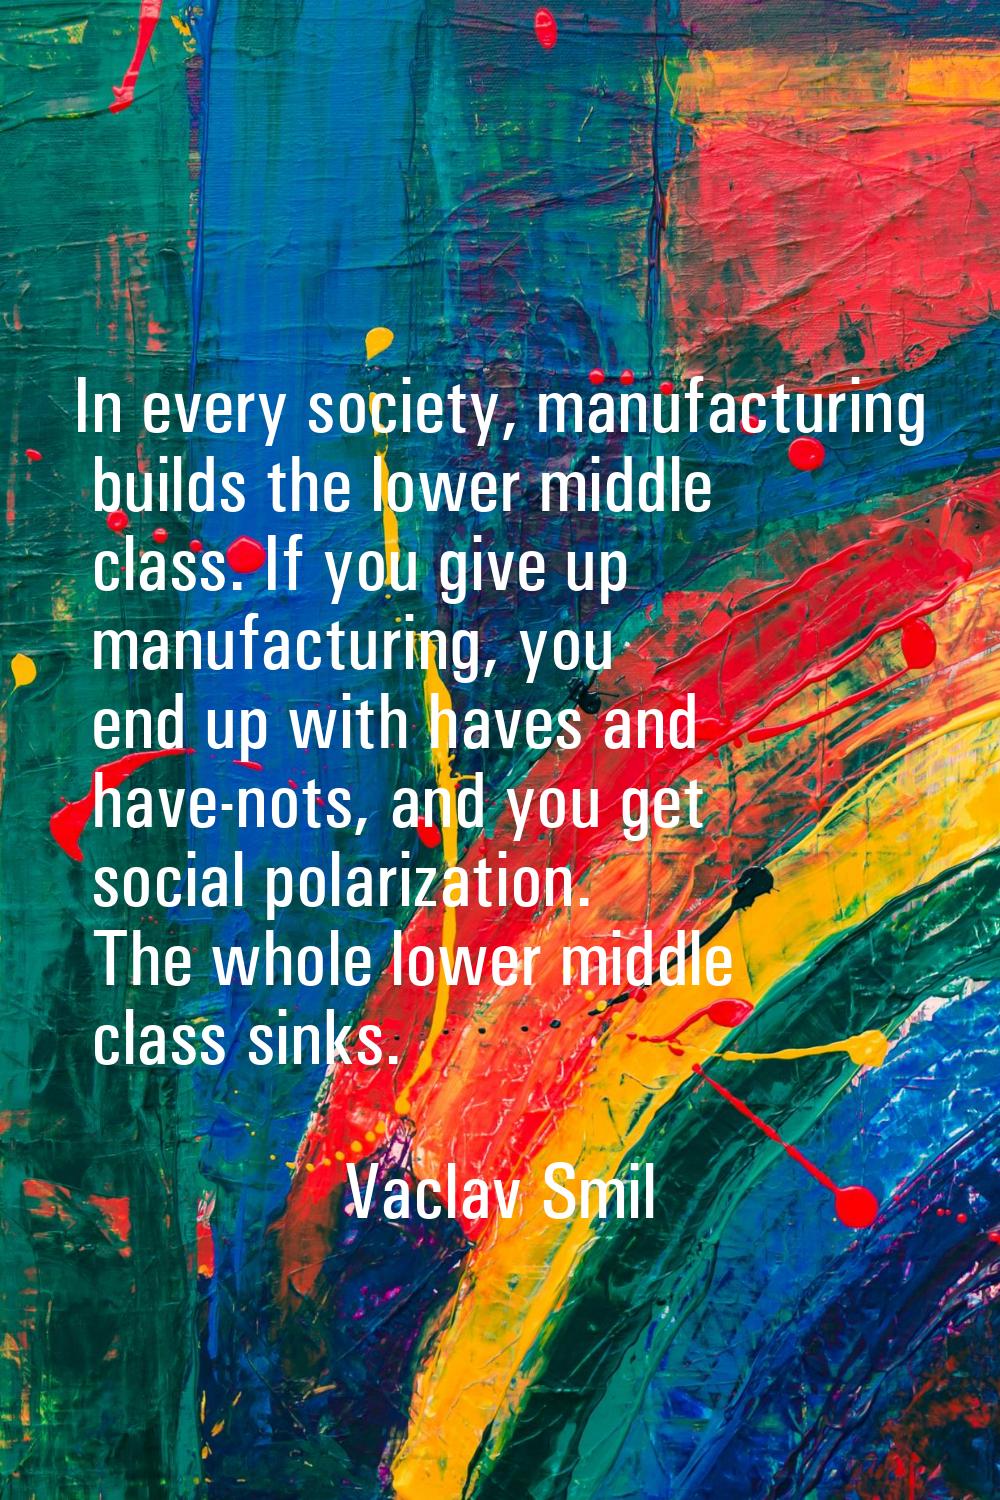 In every society, manufacturing builds the lower middle class. If you give up manufacturing, you en